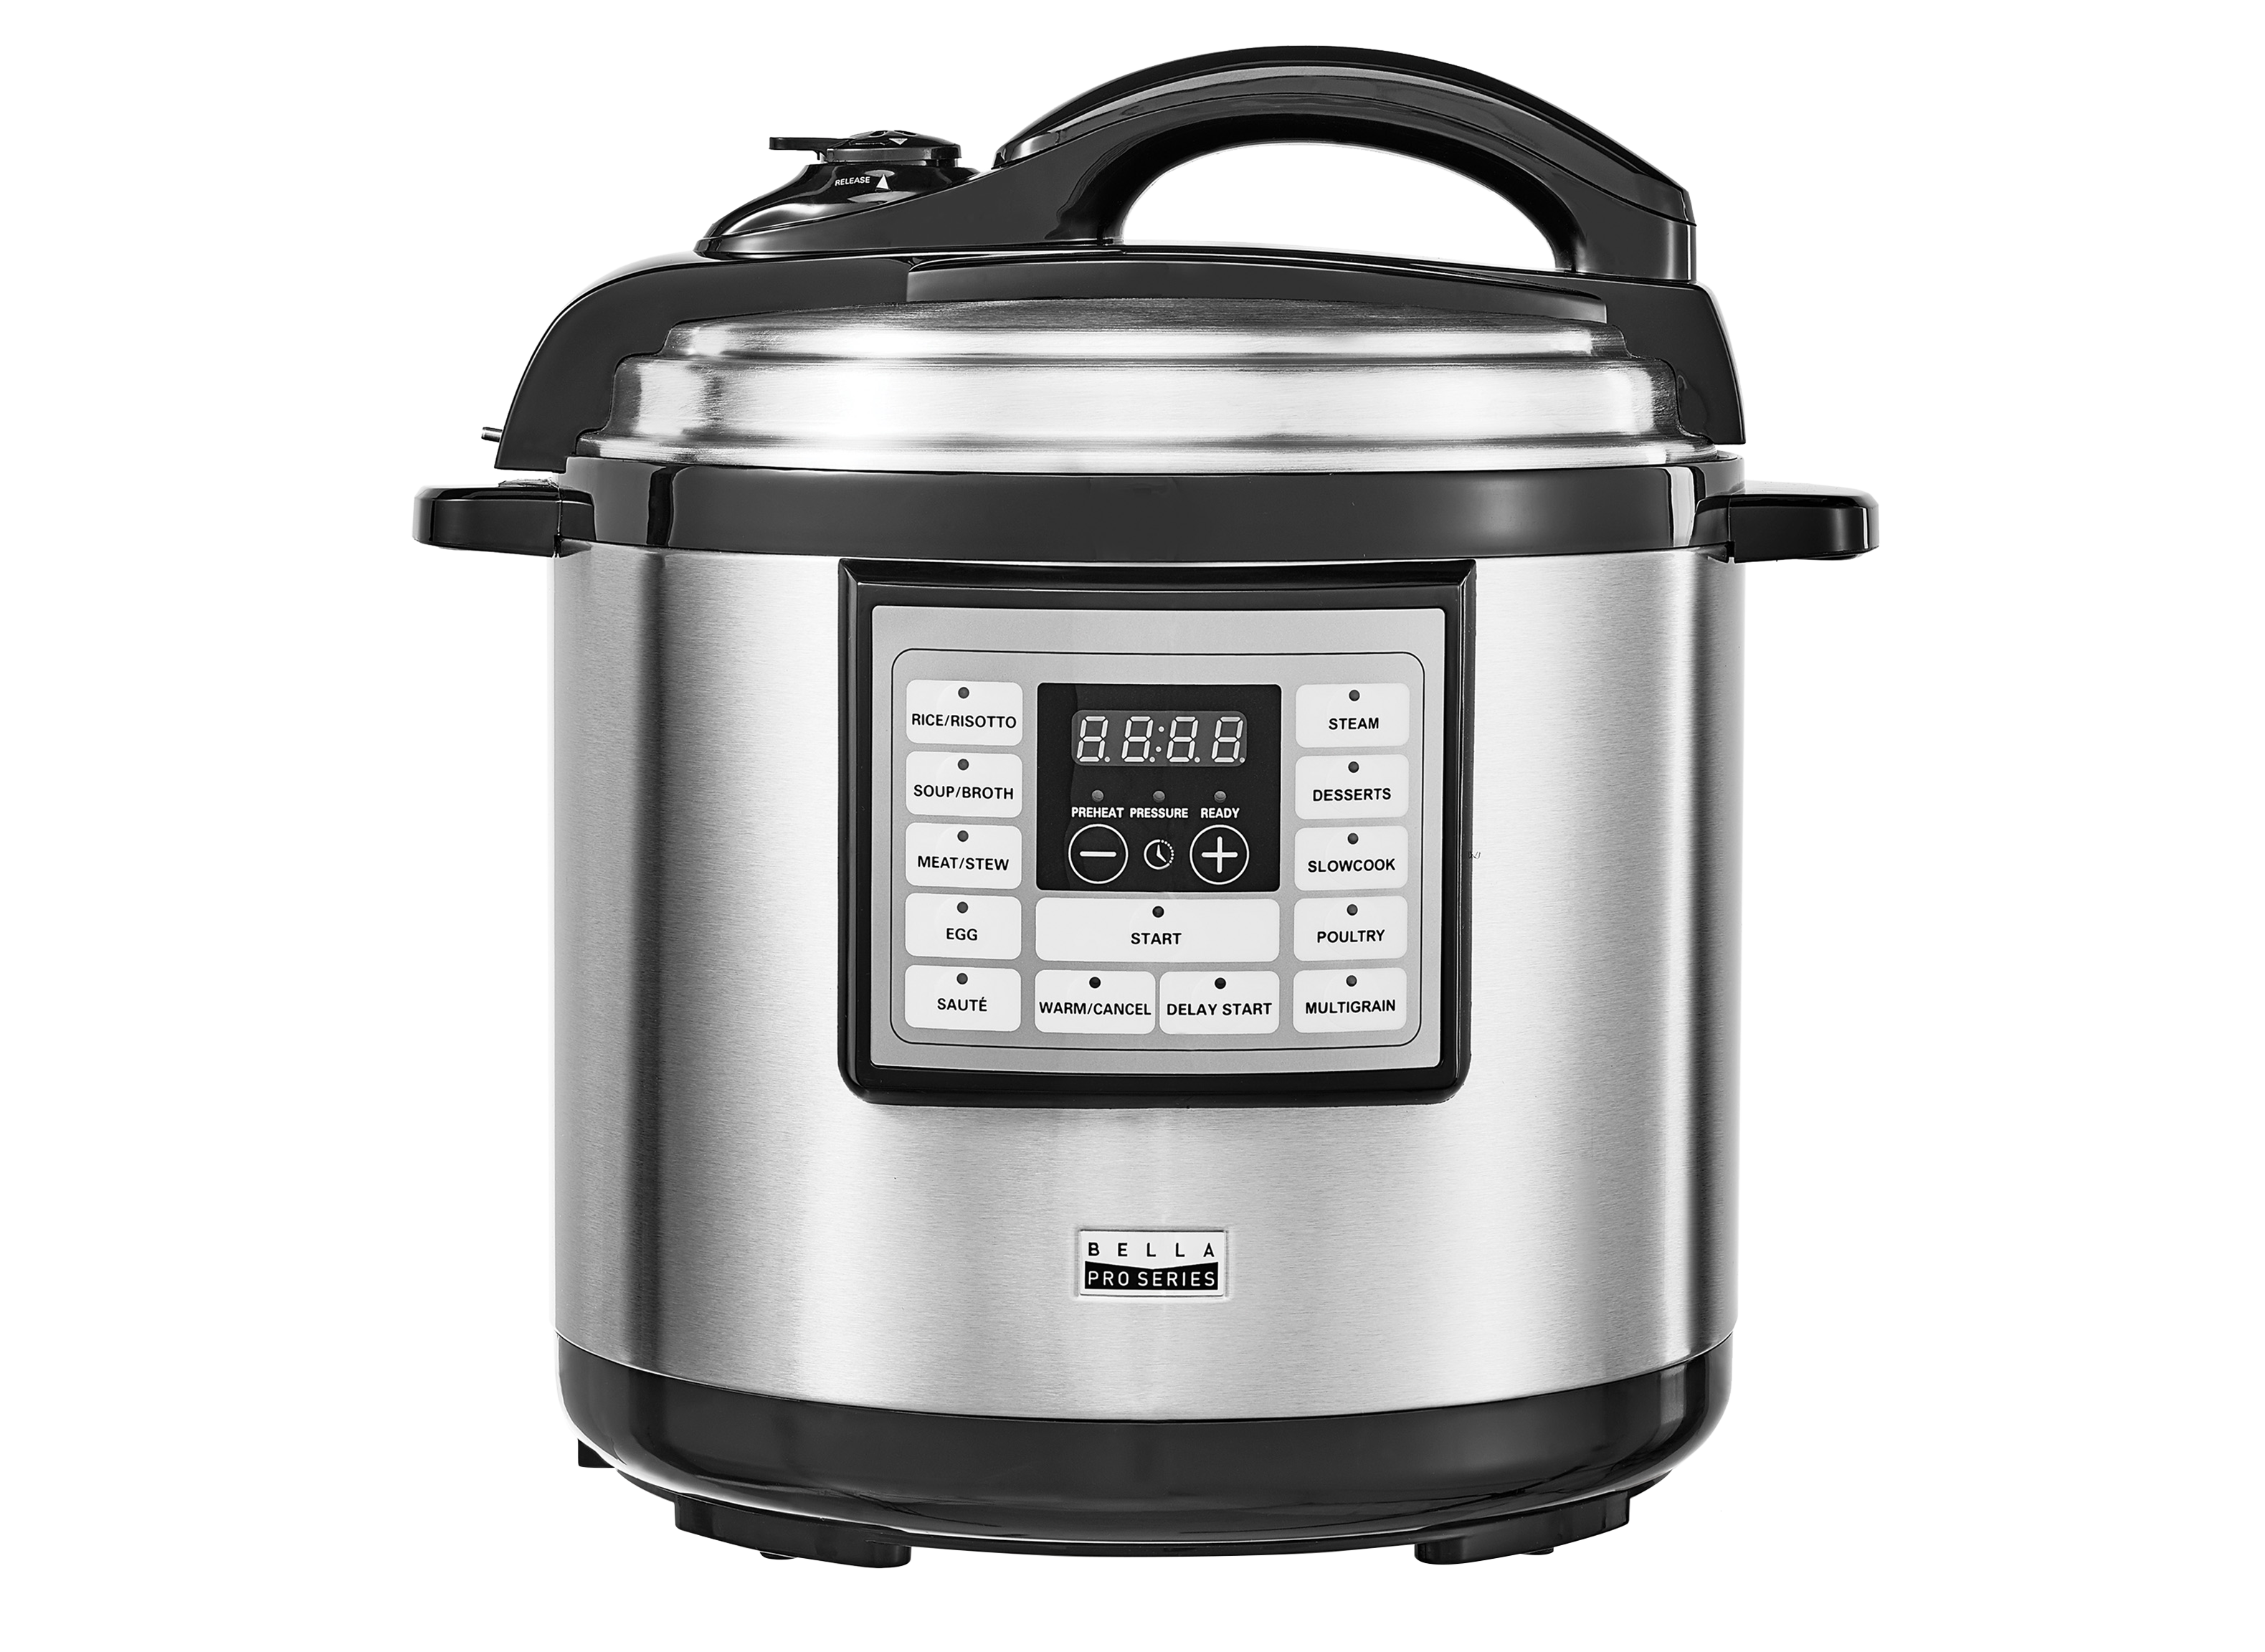 https://crdms.images.consumerreports.org/prod/products/cr/models/400773-with-pressure-cooking-mode-bella-pro-series-8-qt-digital-90073-10011129.png